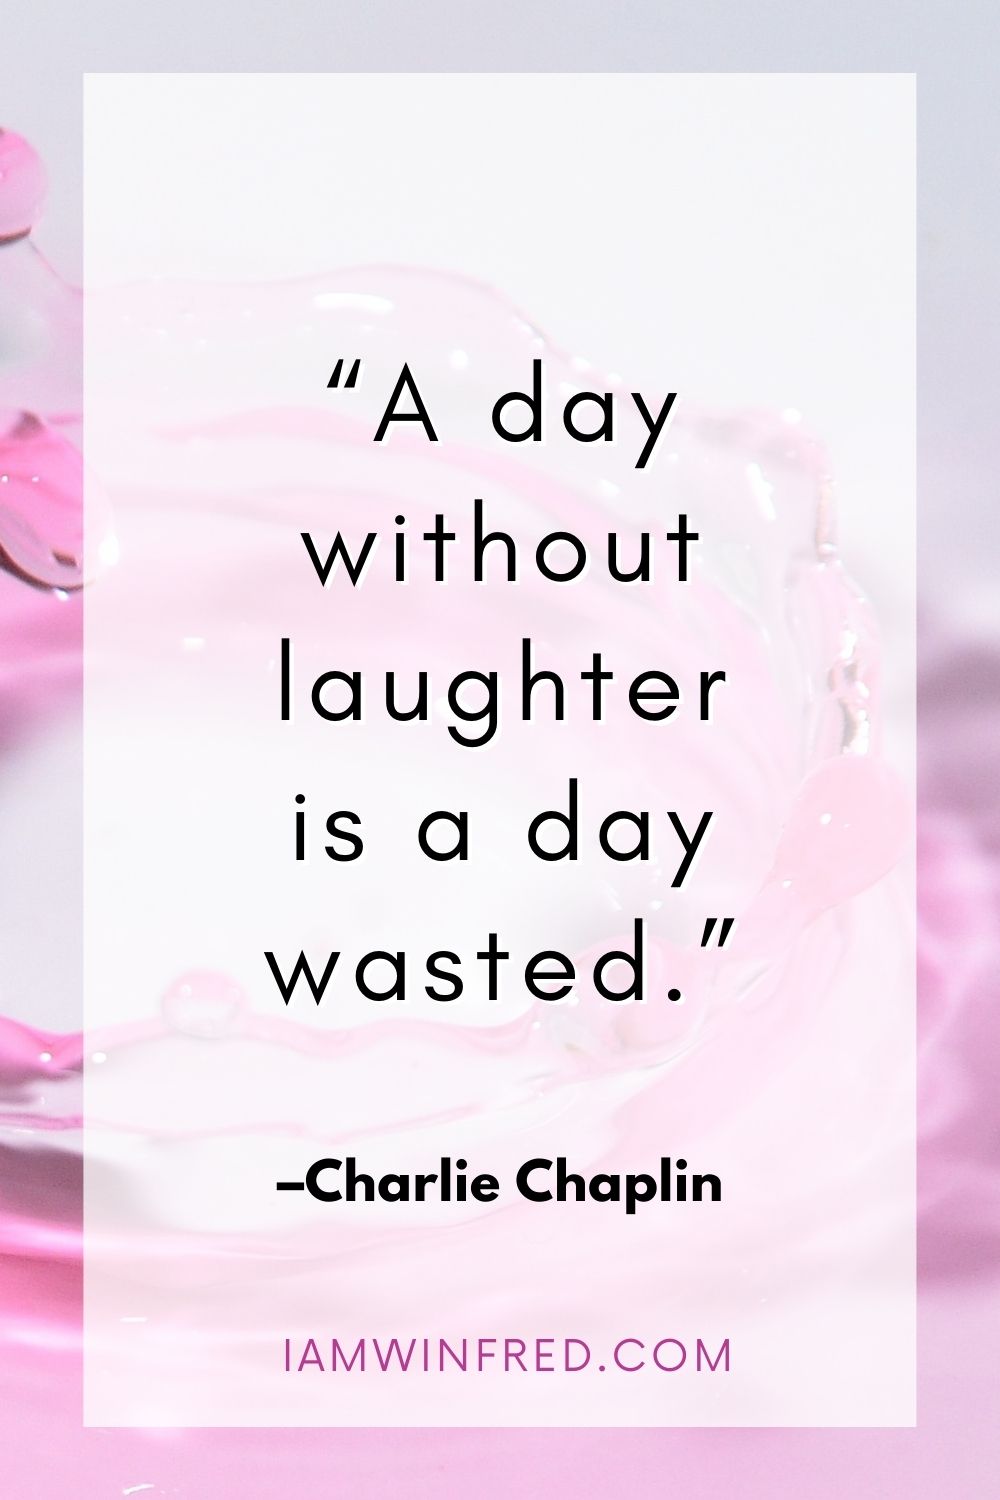 A Day Without Laughter Is A Day Wasted.